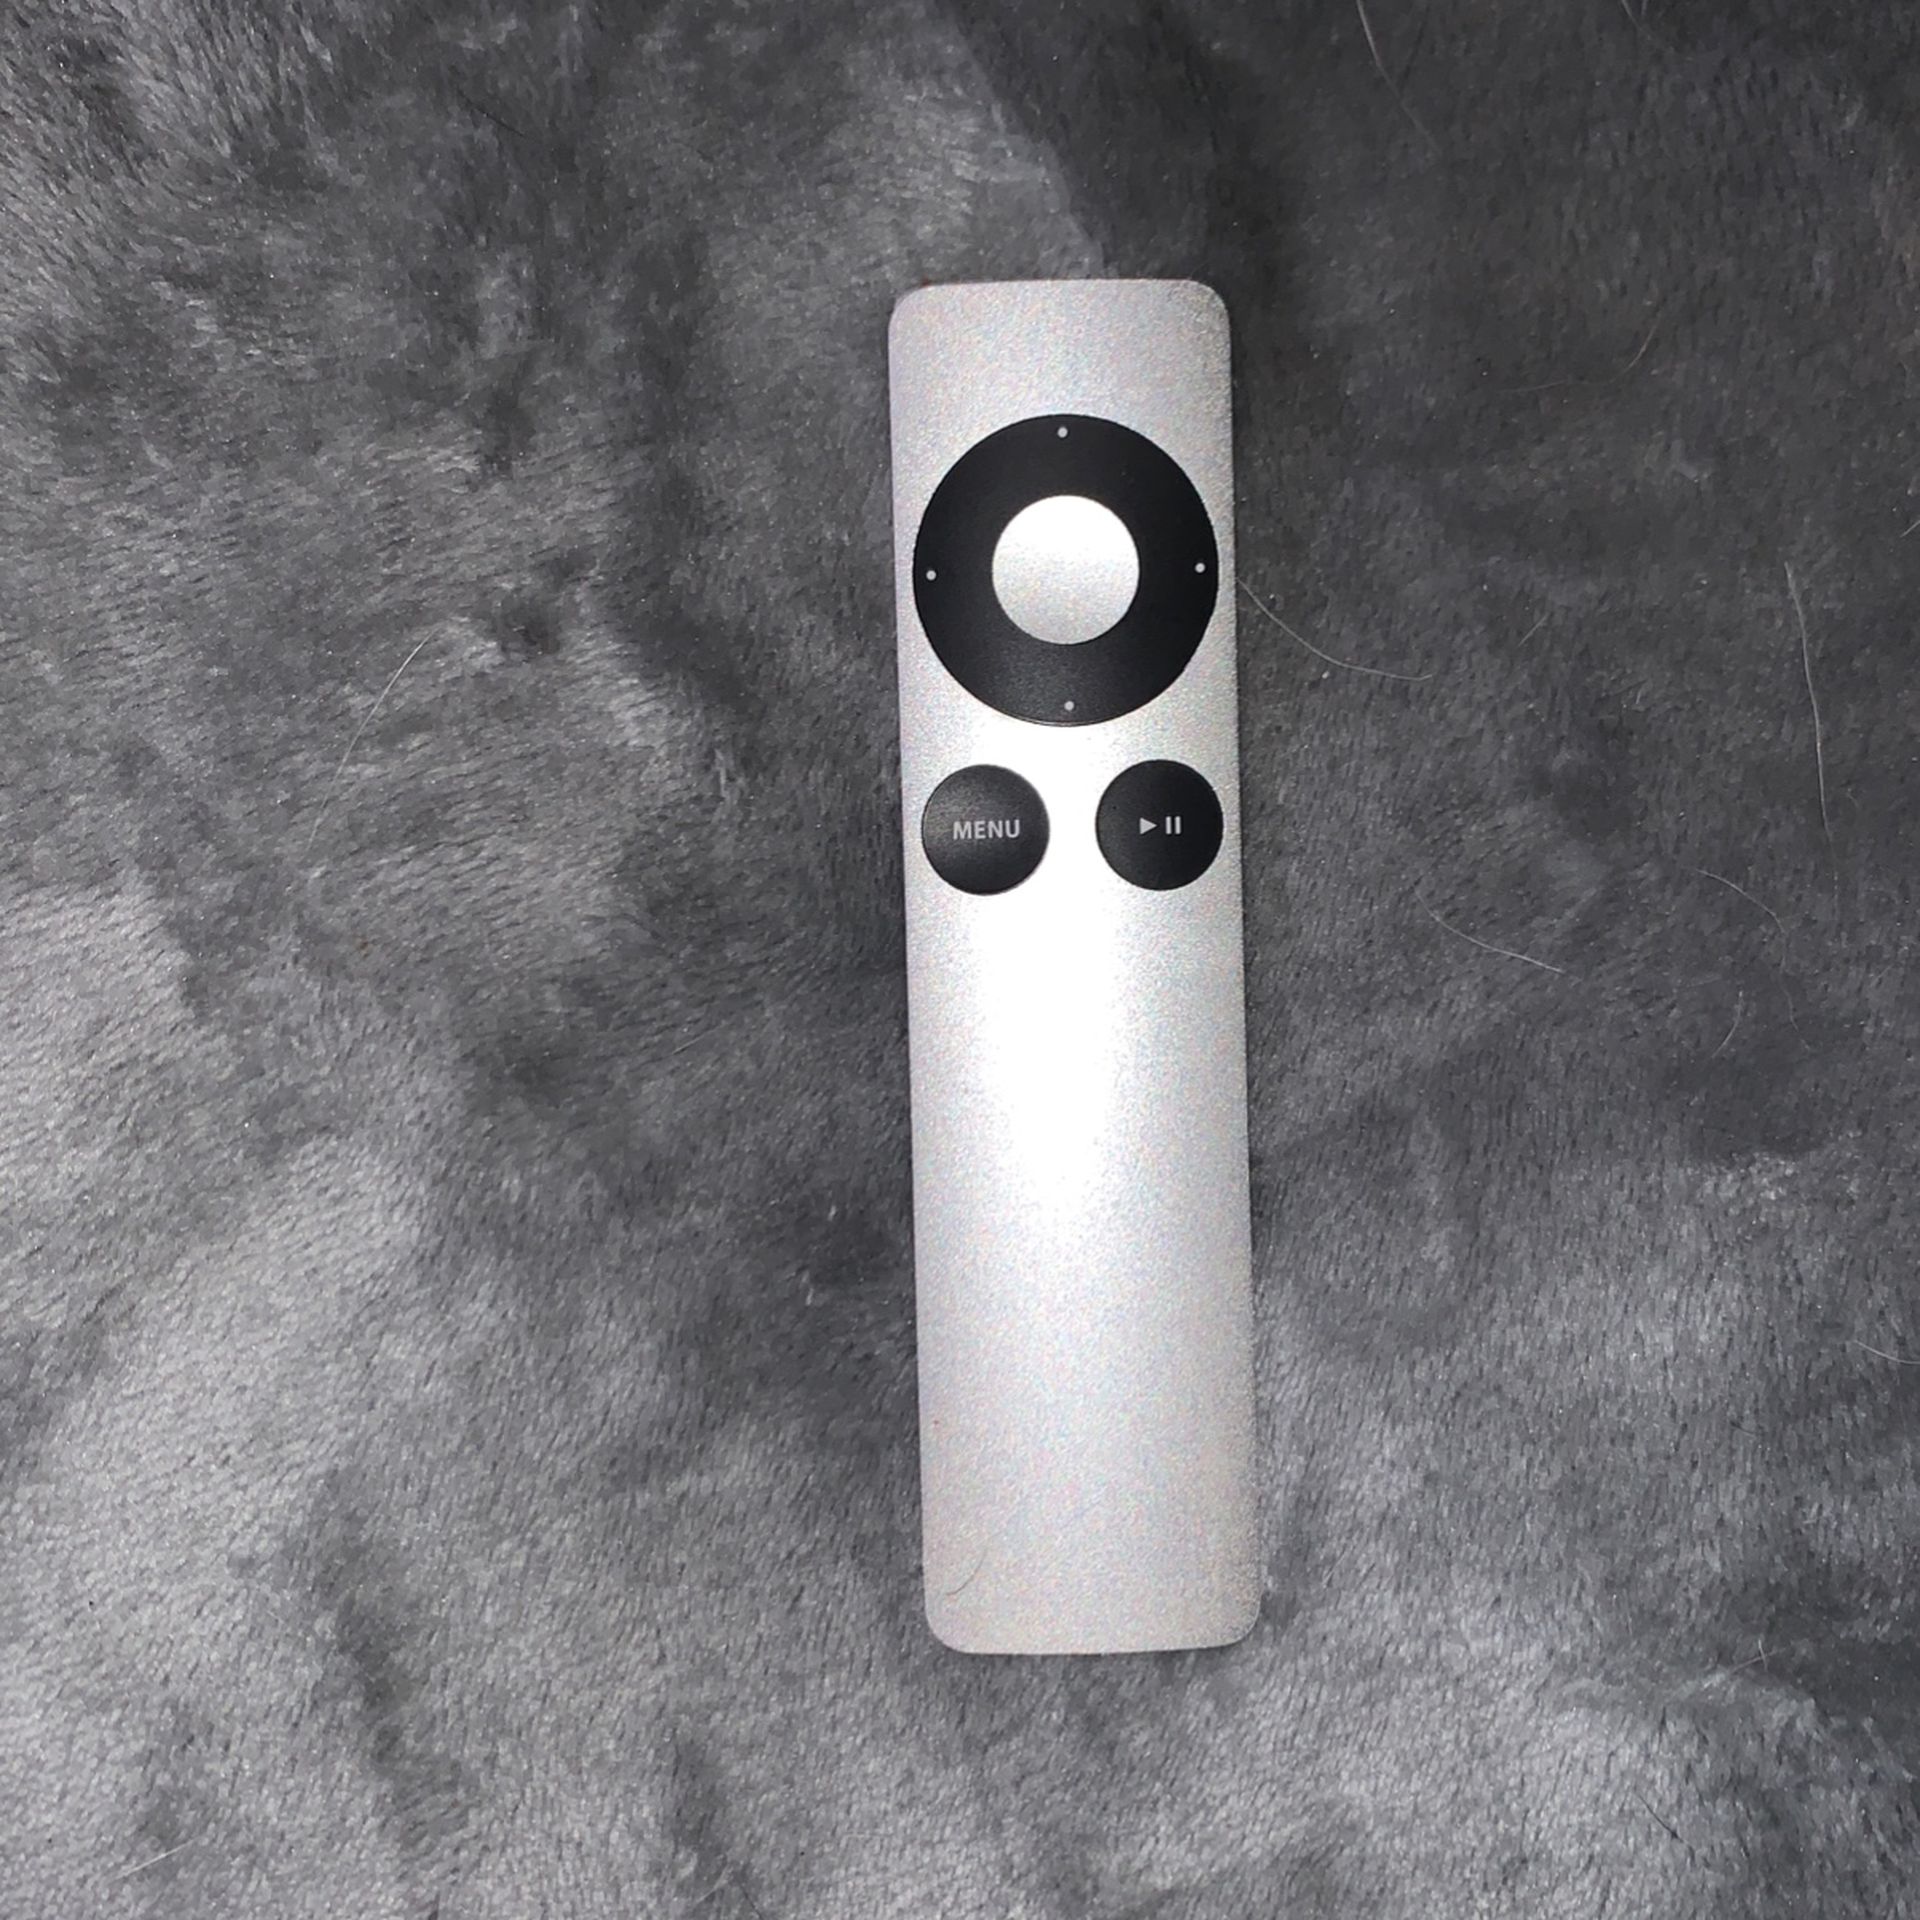 Apple TV remote control, solid aluminum, very sturdy